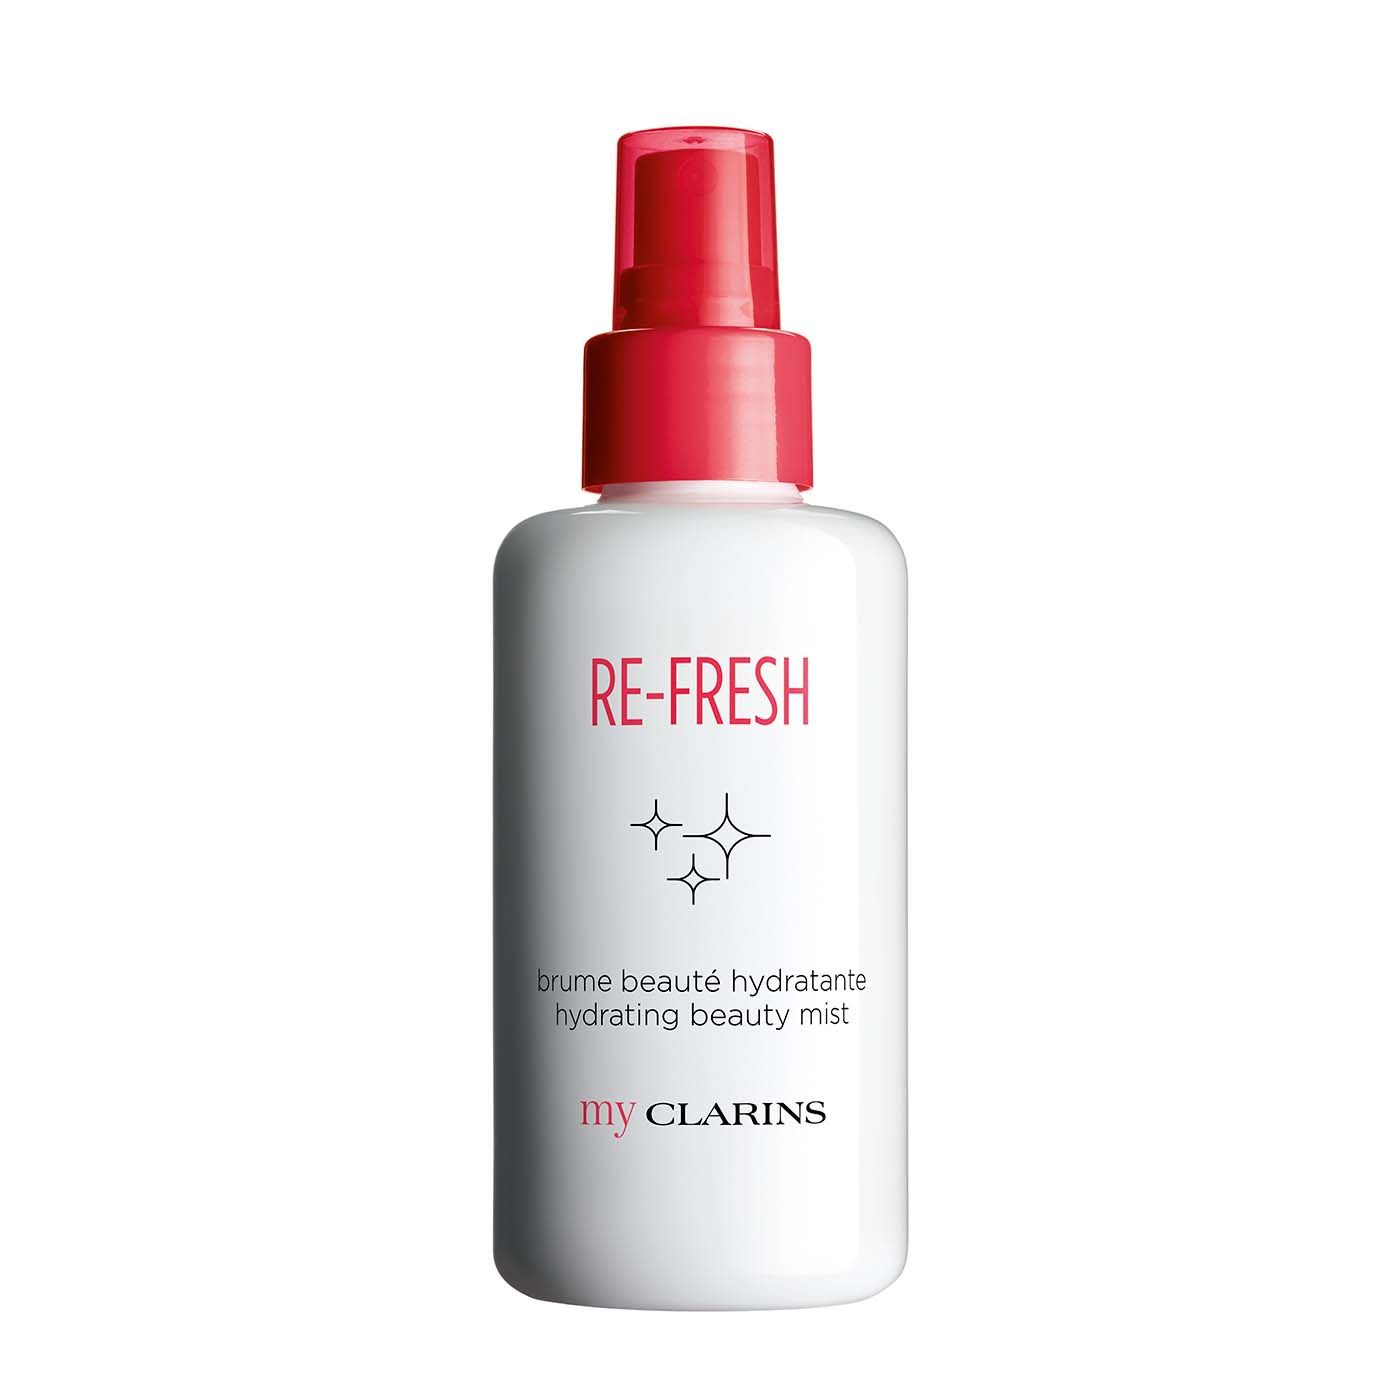 My Clarins Re-Fresh Hydrating Beauty Face Mist | Clarins USA